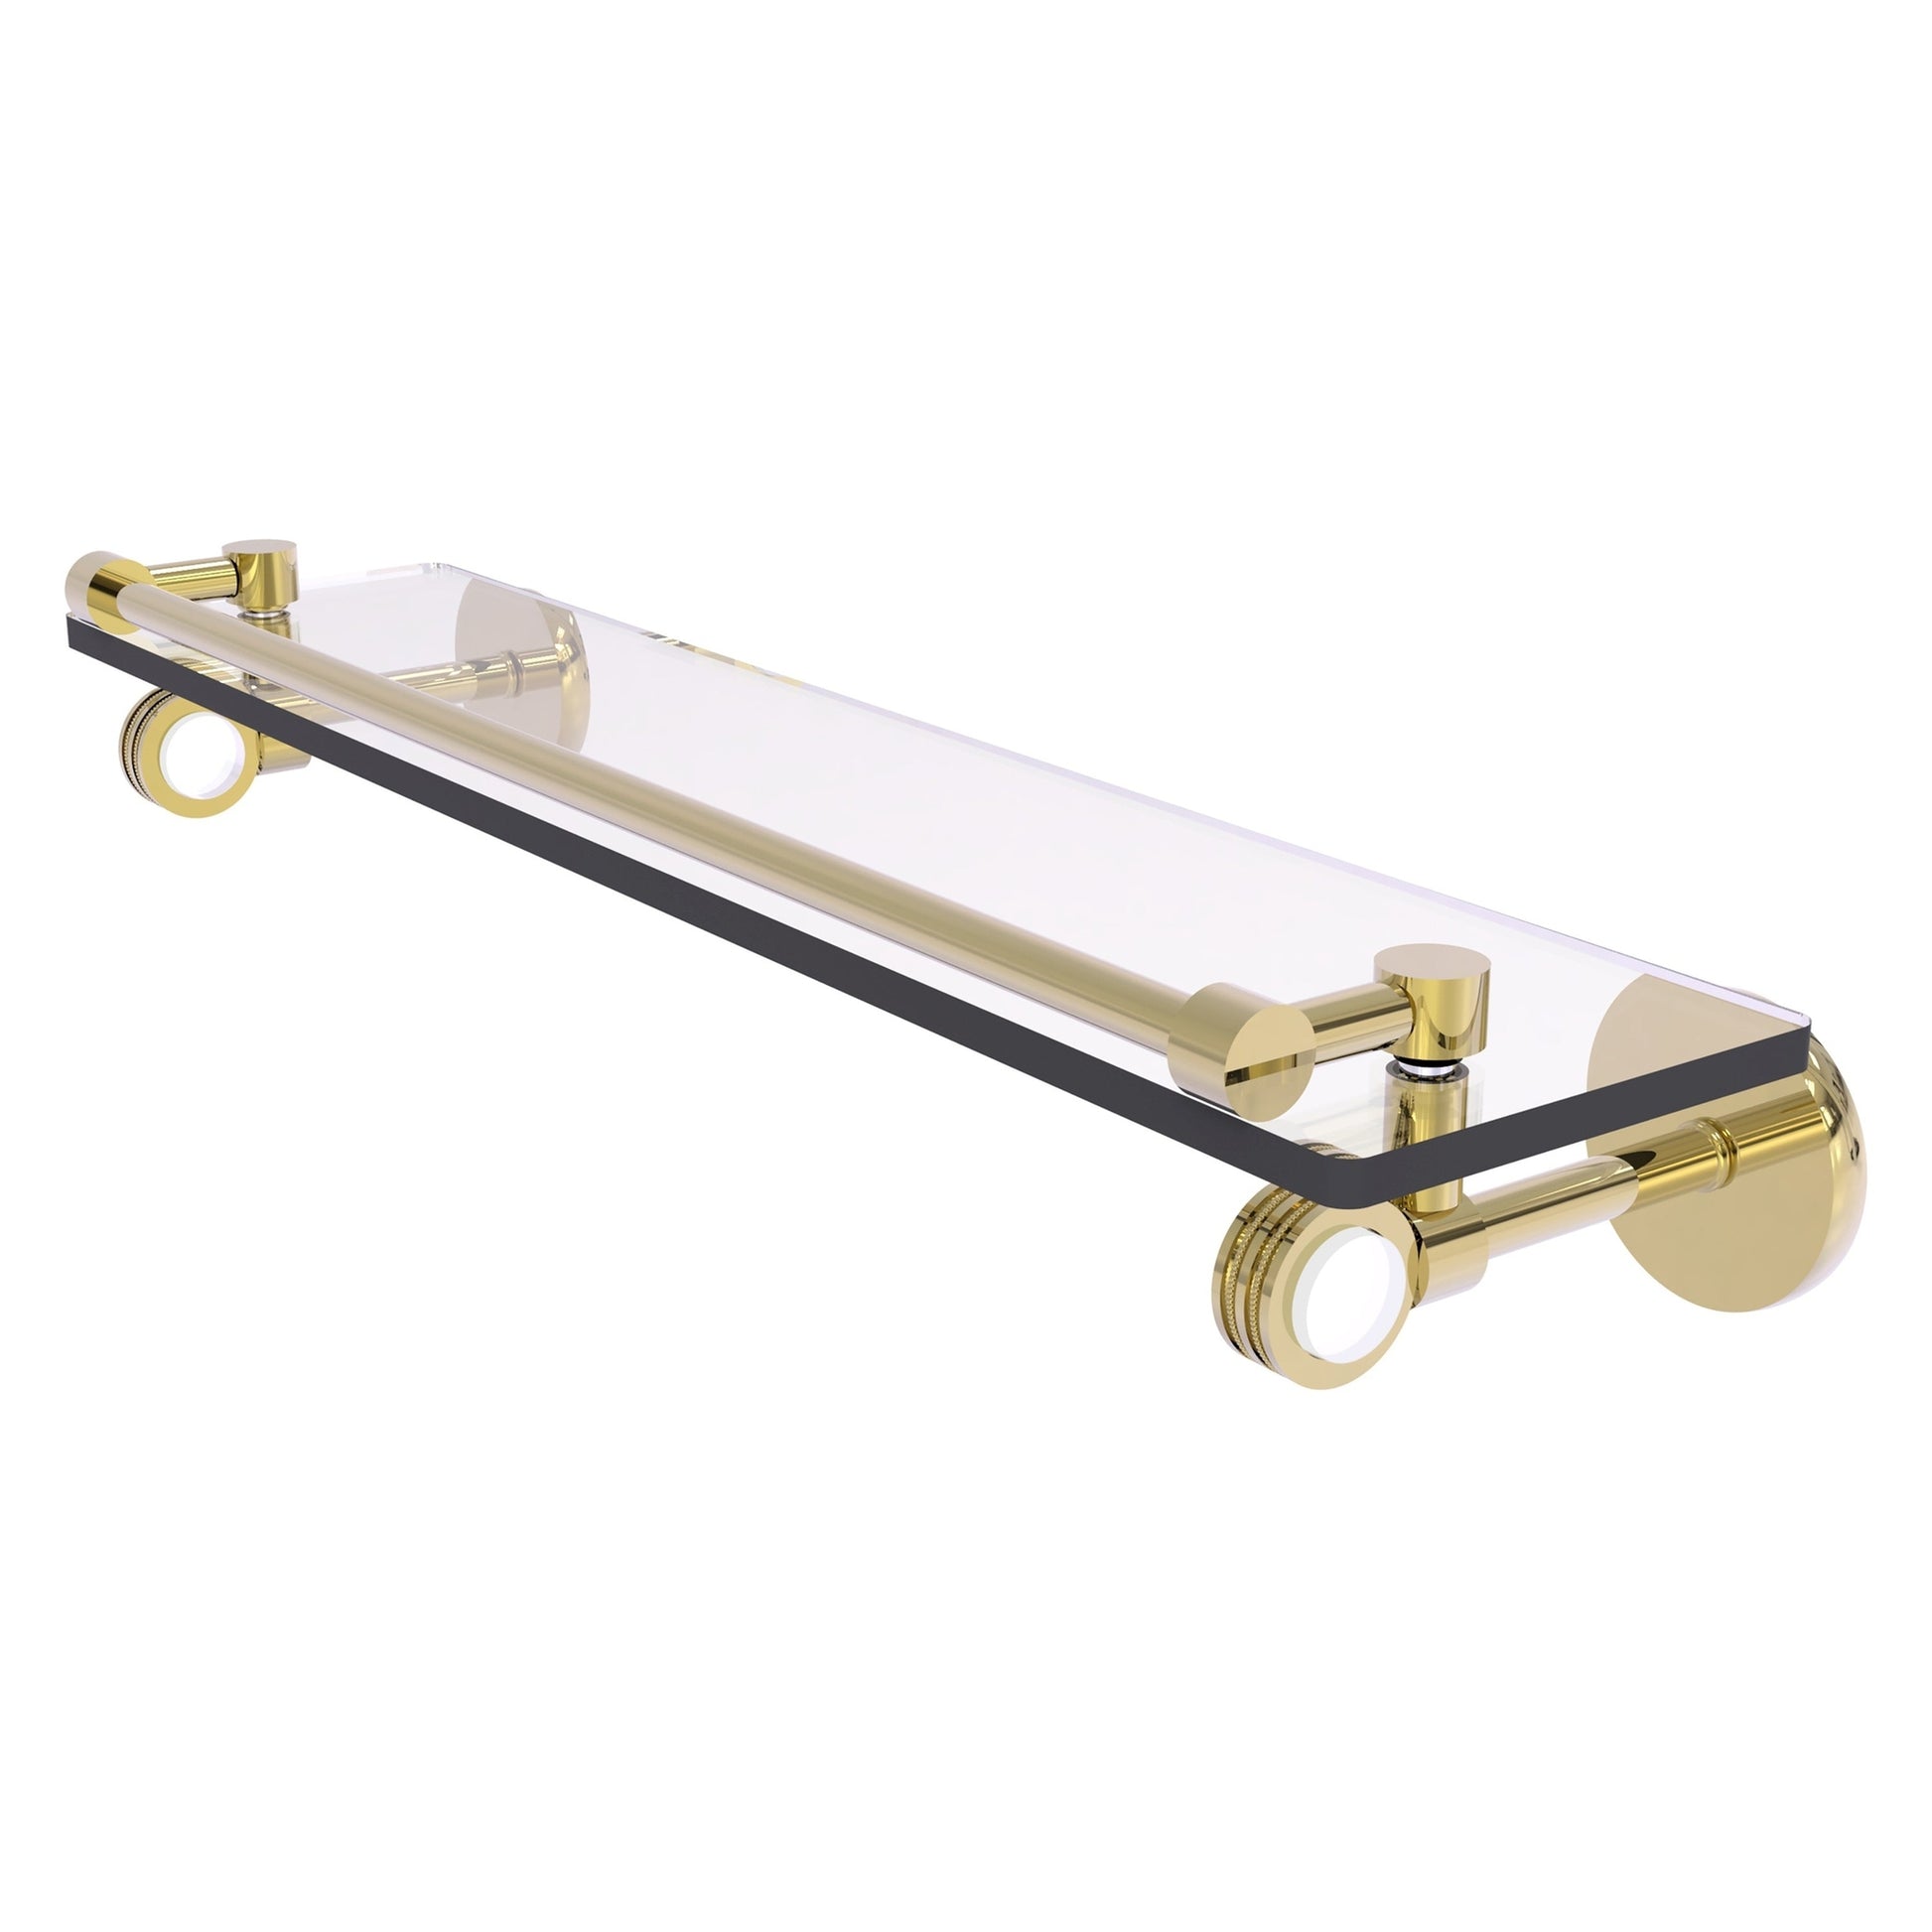 https://usbathstore.com/cdn/shop/files/Allied-Brass-Clearview-22-x-5_65-Unlacquered-Brass-Solid-Brass-Gallery-Rail-Glass-Shelf-With-Dotted-Accents.jpg?v=1694396714&width=1946